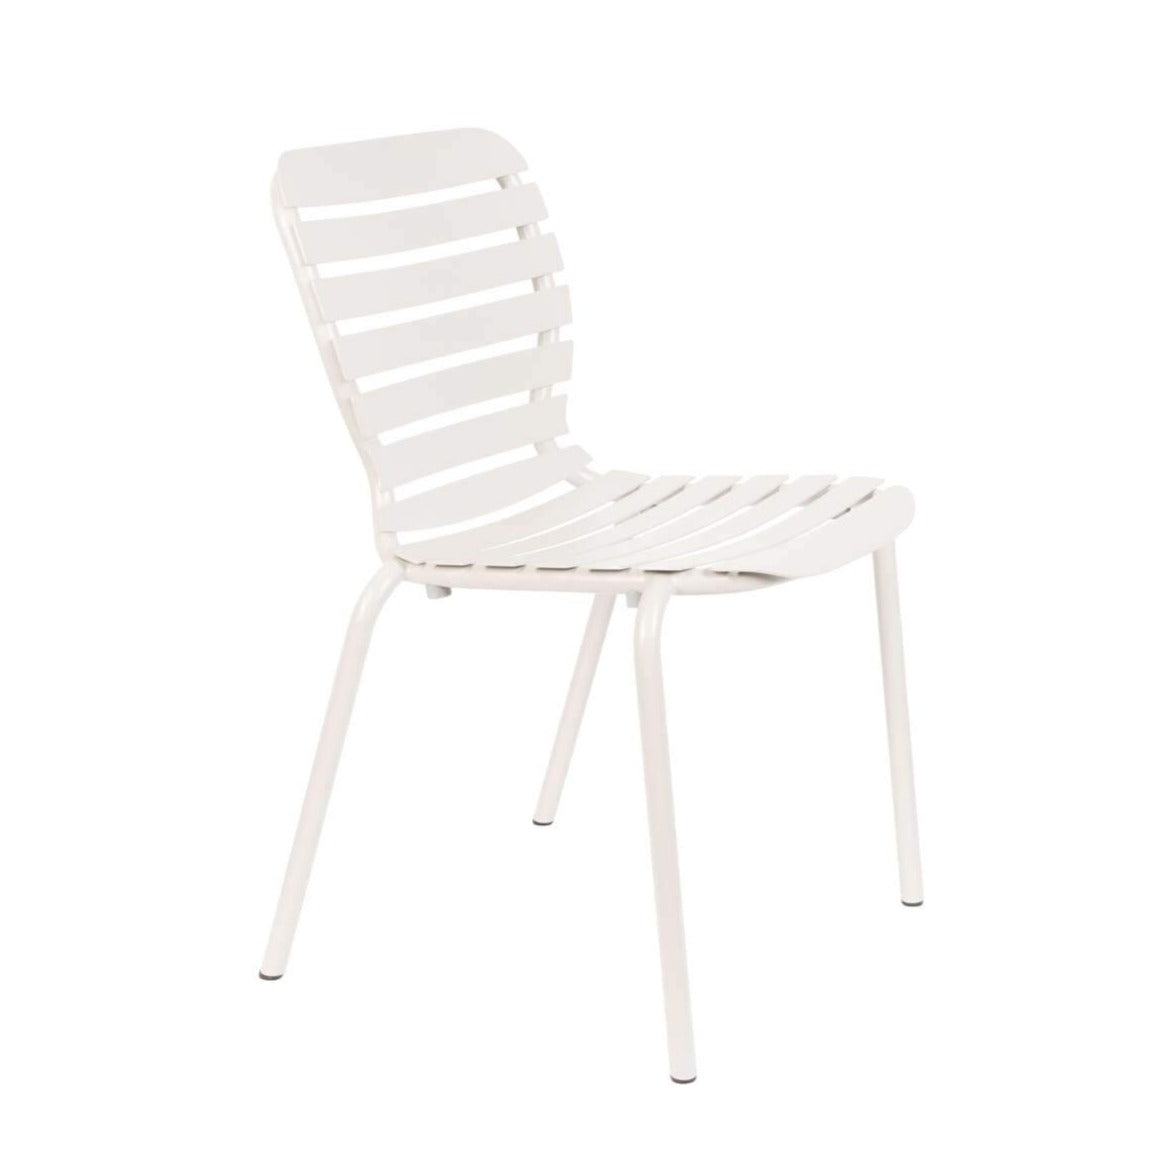 The Vondel garden chair was created for lovers of the sun, morning coffee on a modern terrace and joint Sunday dinners outside. The seat is made of the highest quality aluminum, thanks to which the furniture is resistant to weather conditions such as wind, rain and sunlight.